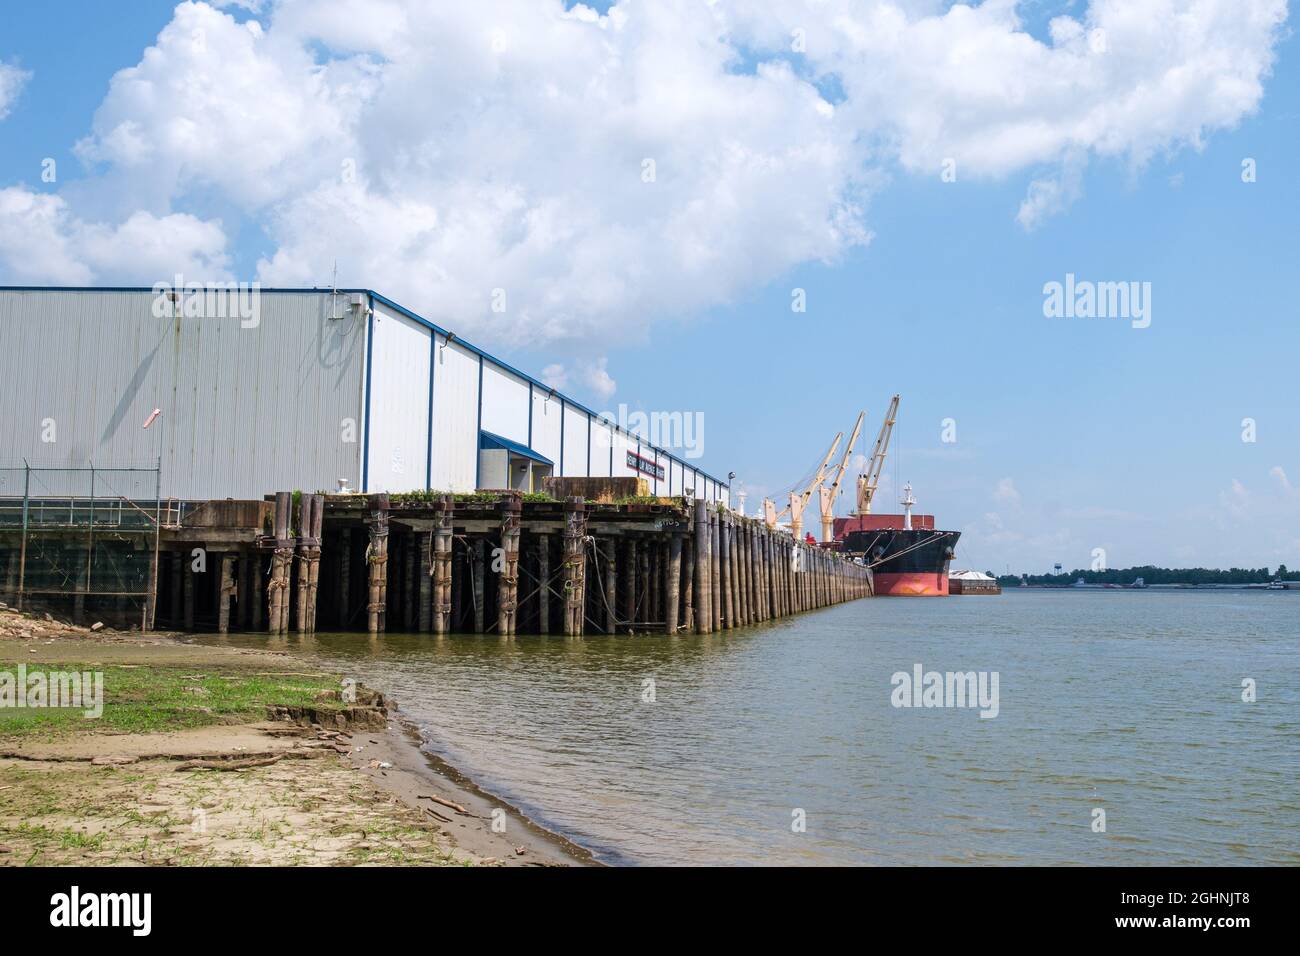 NEW ORLEANS, LA, USA - 25. AUGUST 2021: Henry Clay Avenue Wharf am Mississippi River Stockfoto